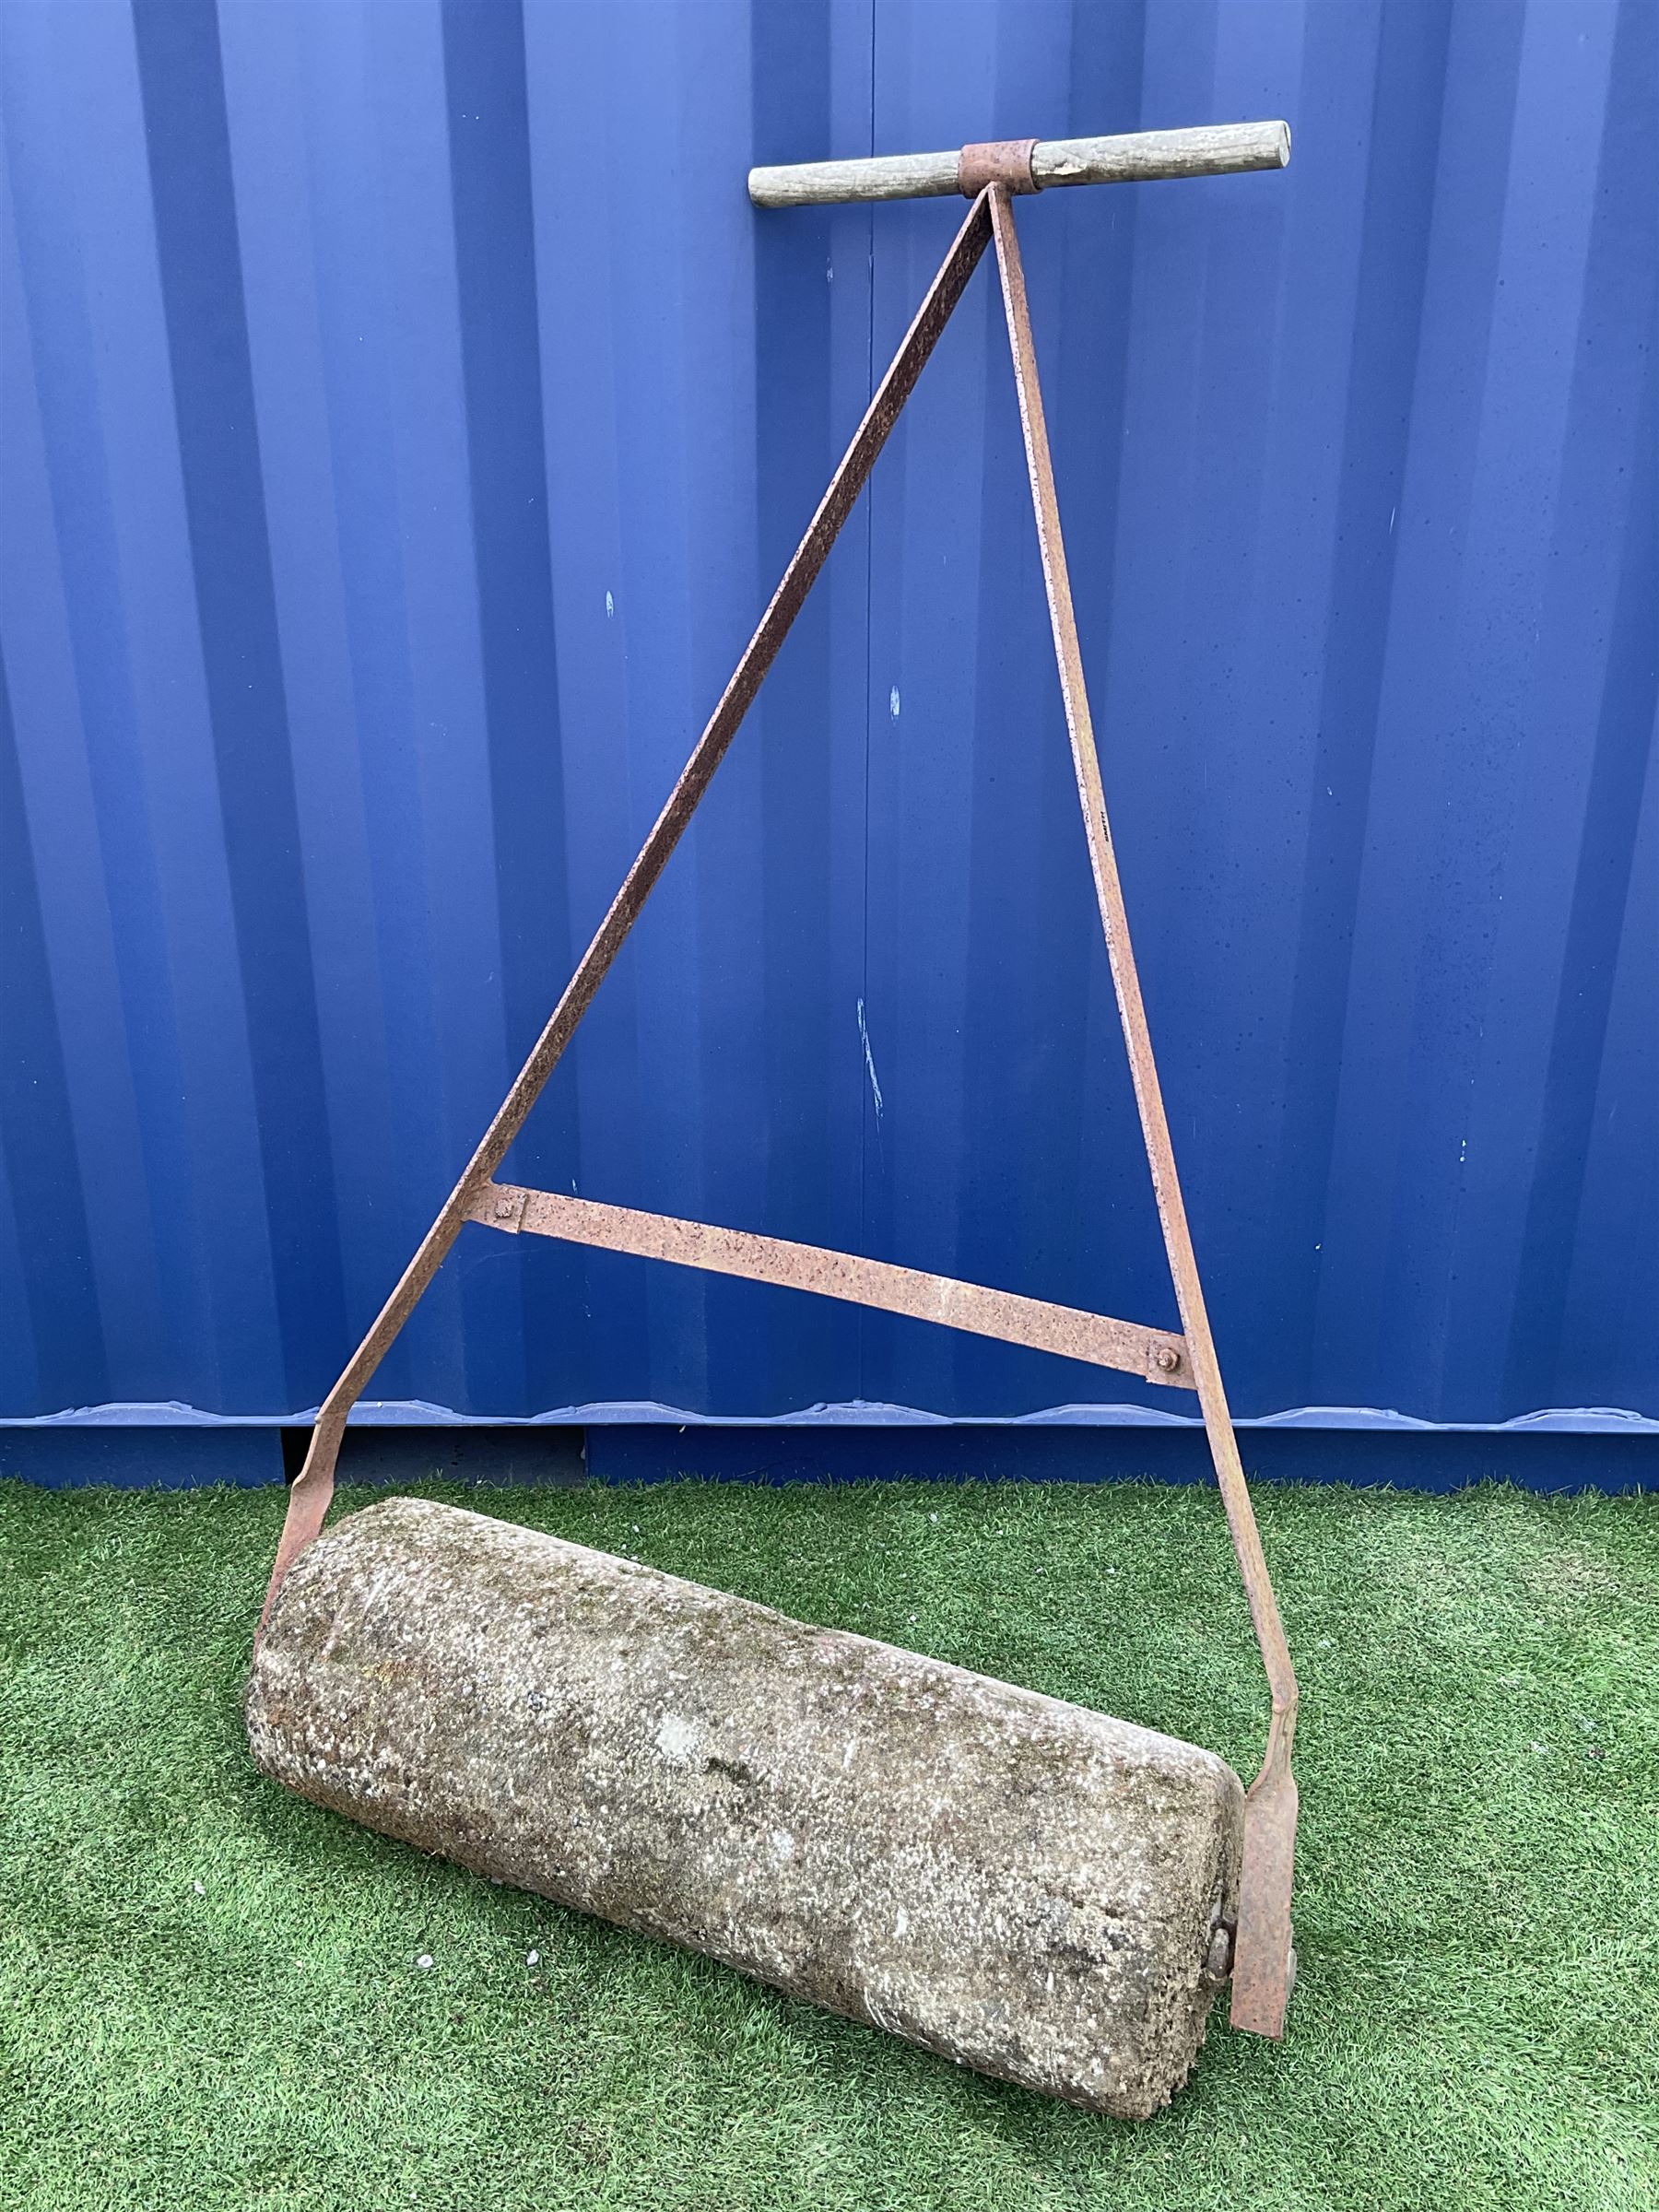 19th century stone and metal lawn roller